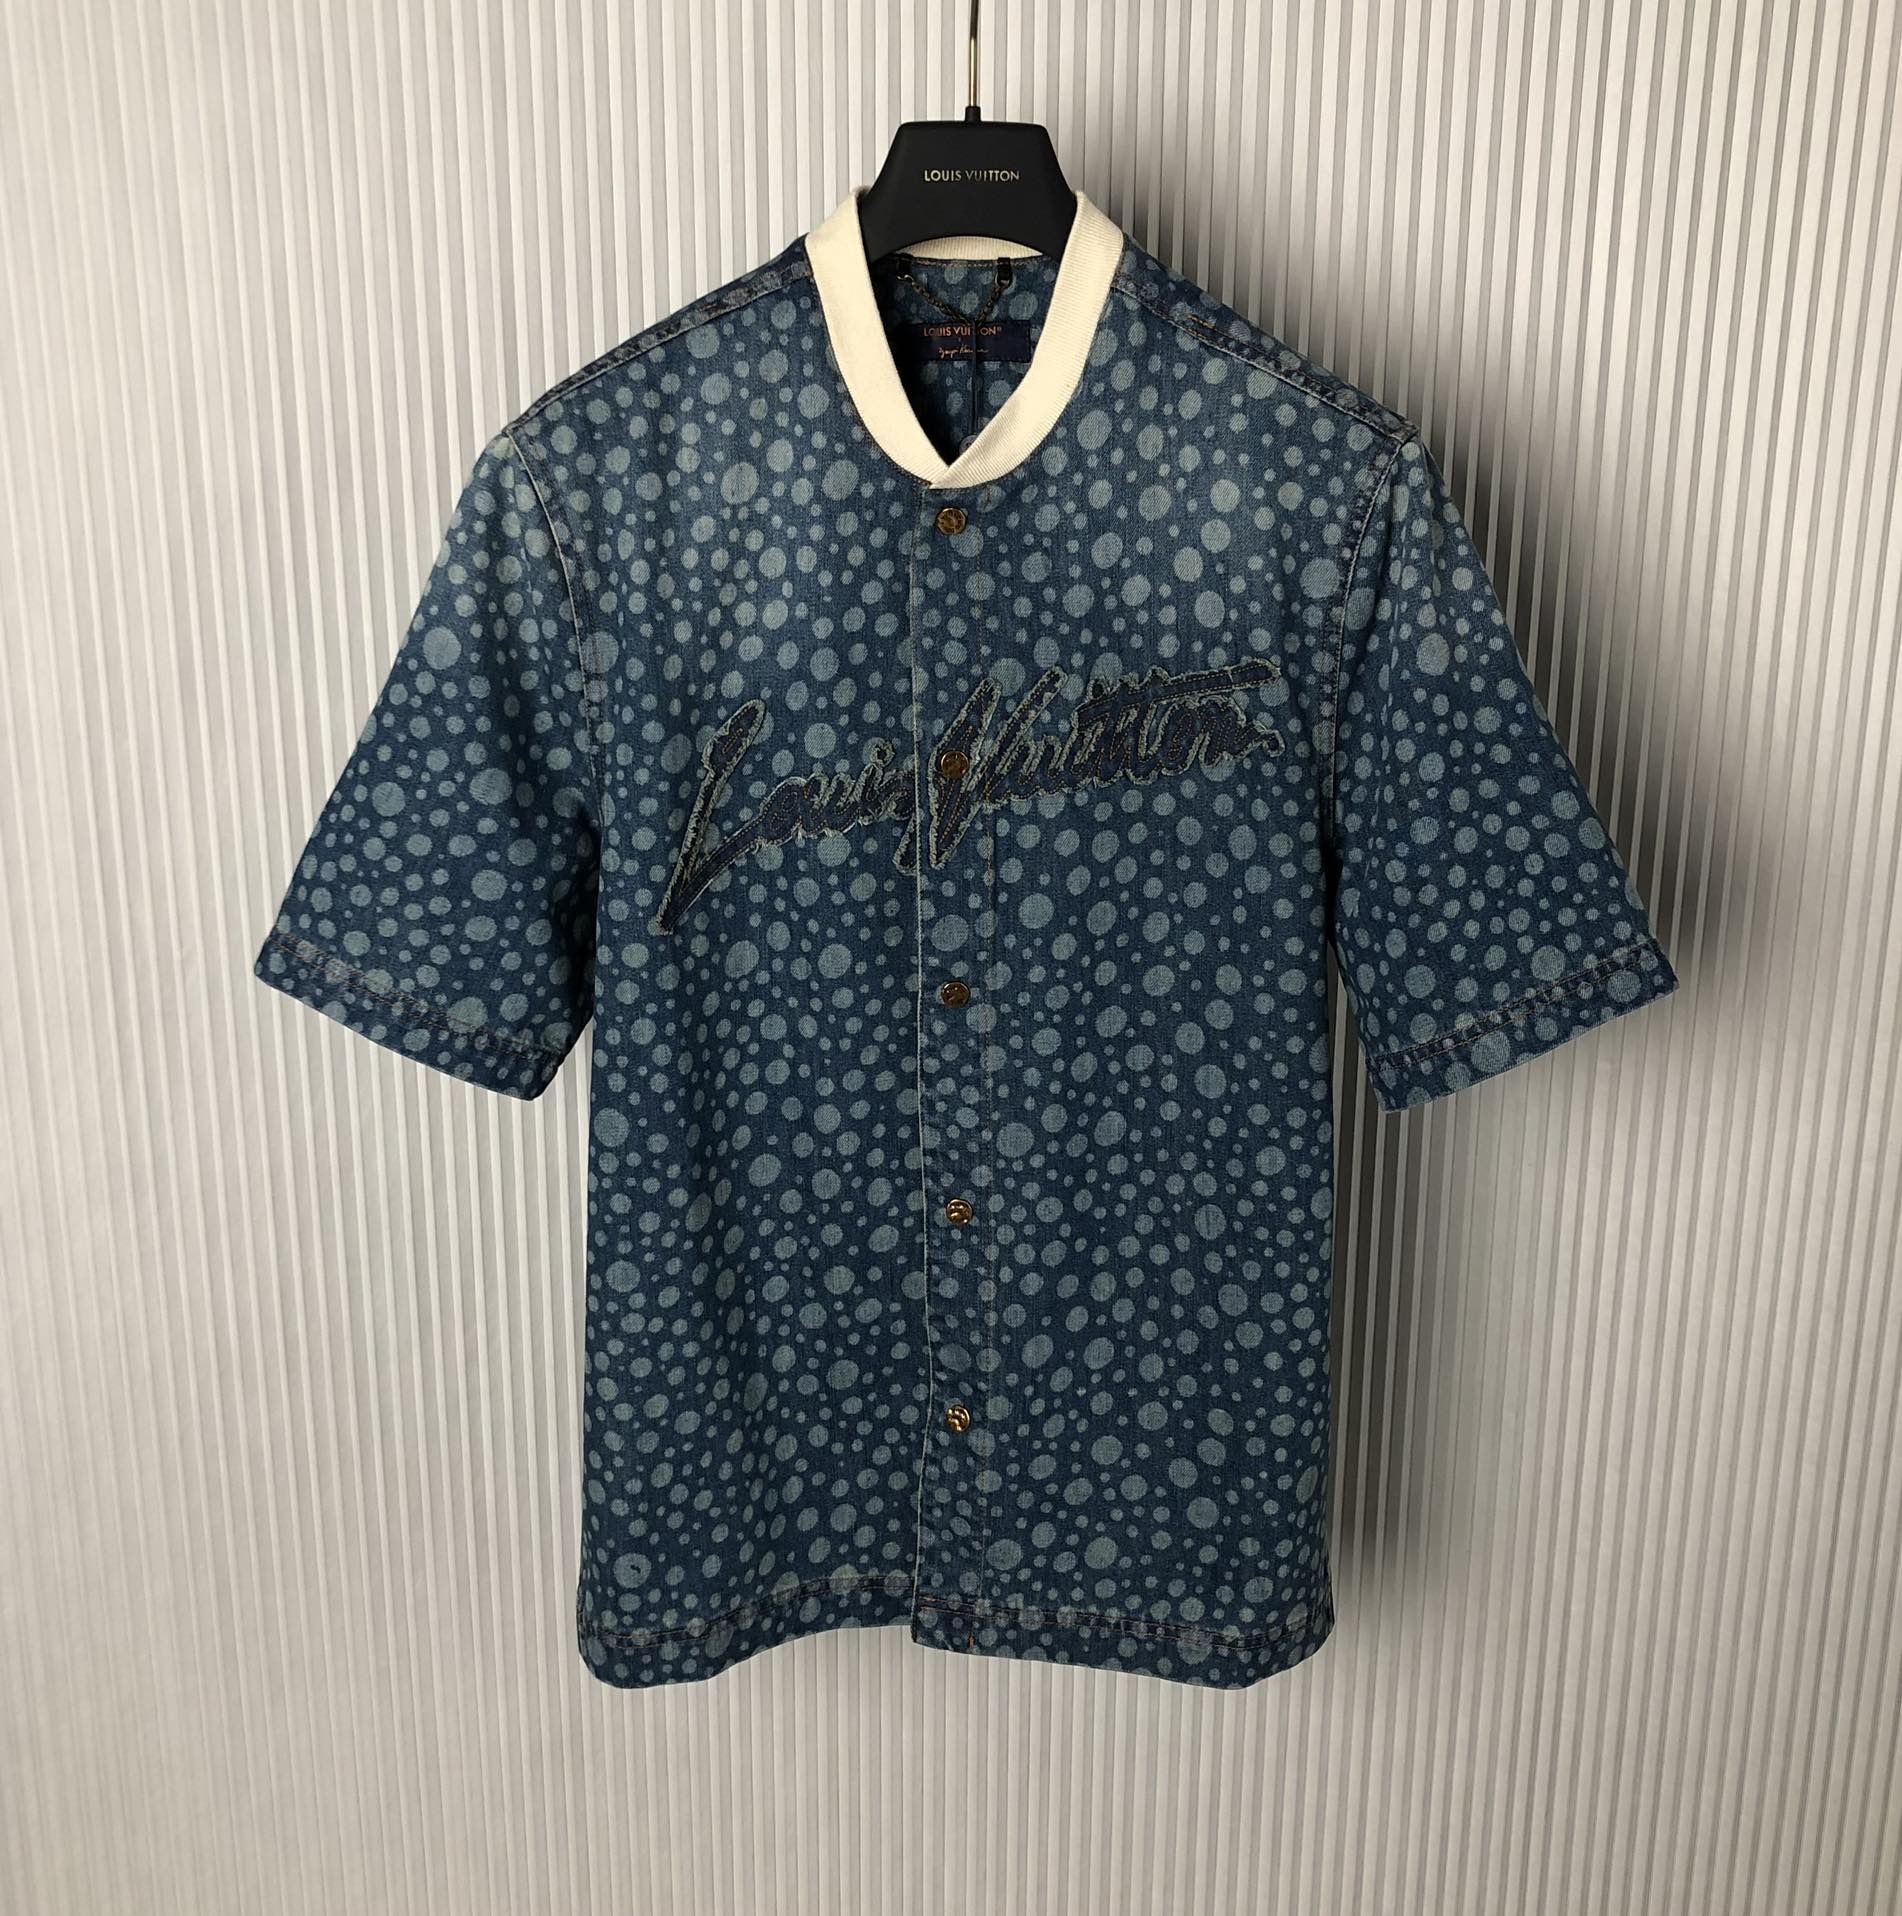 Louis Vuitton Clothing Shirts & Blouses Luxury Cheap Replica
 Blue Orange Red White Printing Unisex Fabric Genuine Leather Vintage Chains